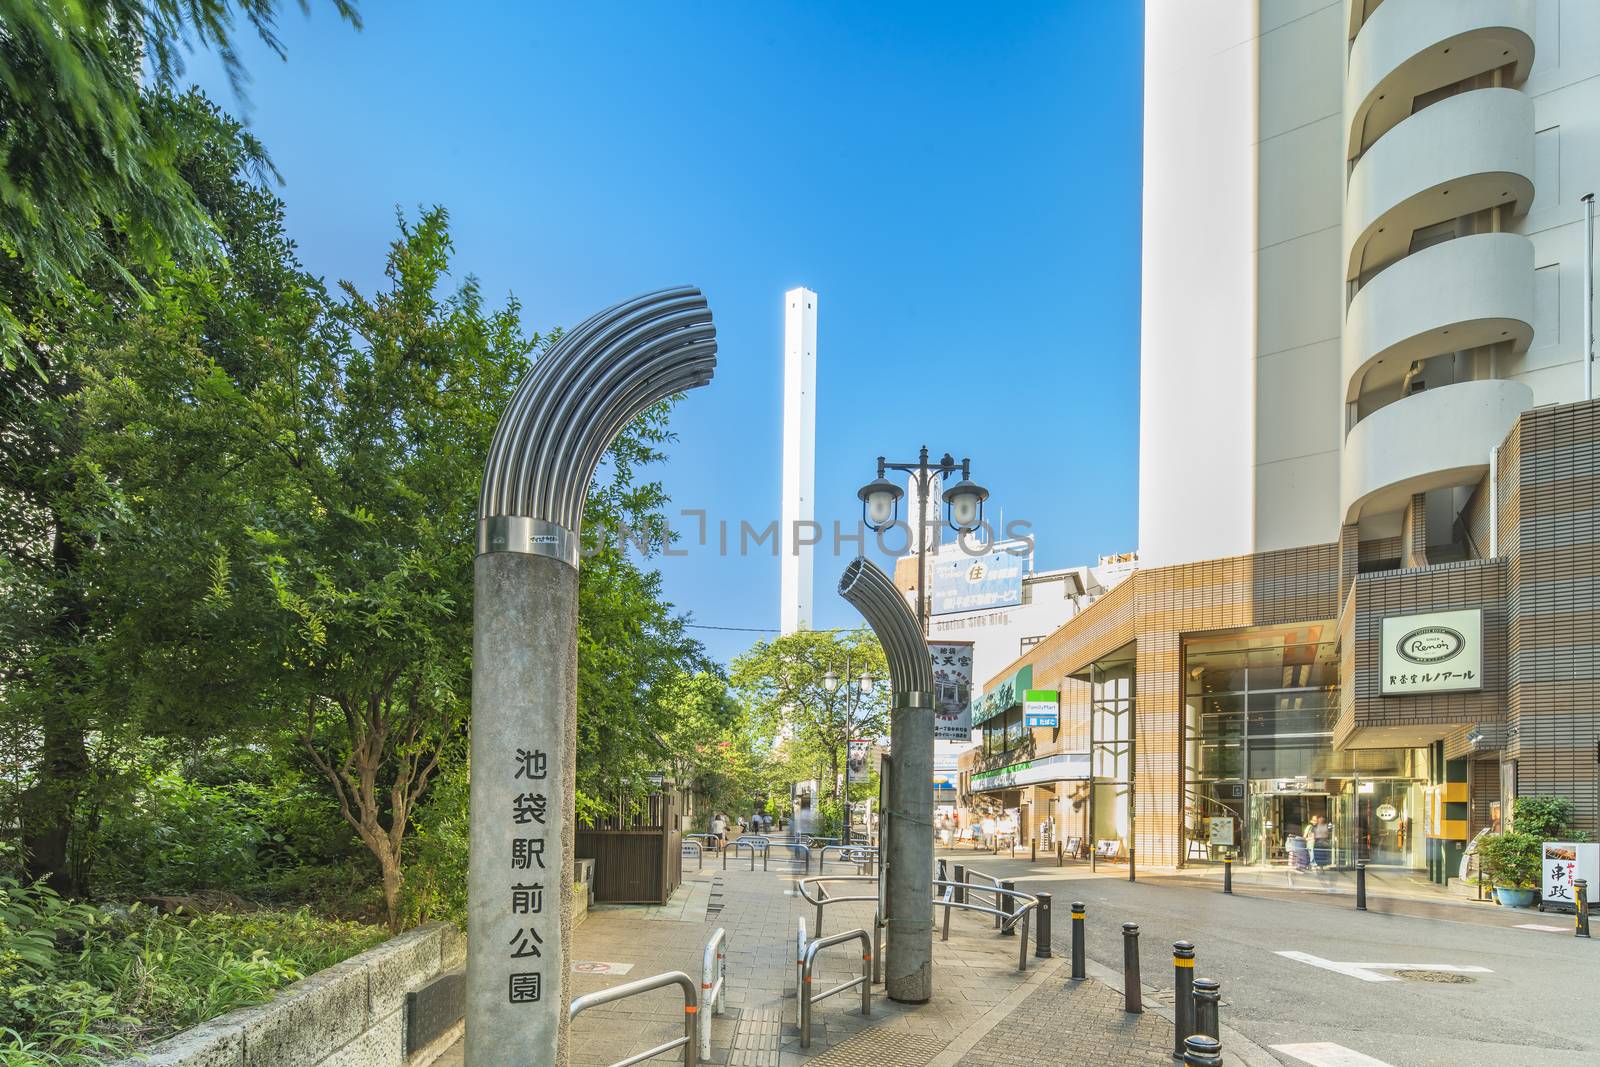 Entrance gate of the Ikebukuro Station Park with in background the Toshima Ward Cleanup Factory chimney in the Ikebukuro district at north of Tokyo, Japan.